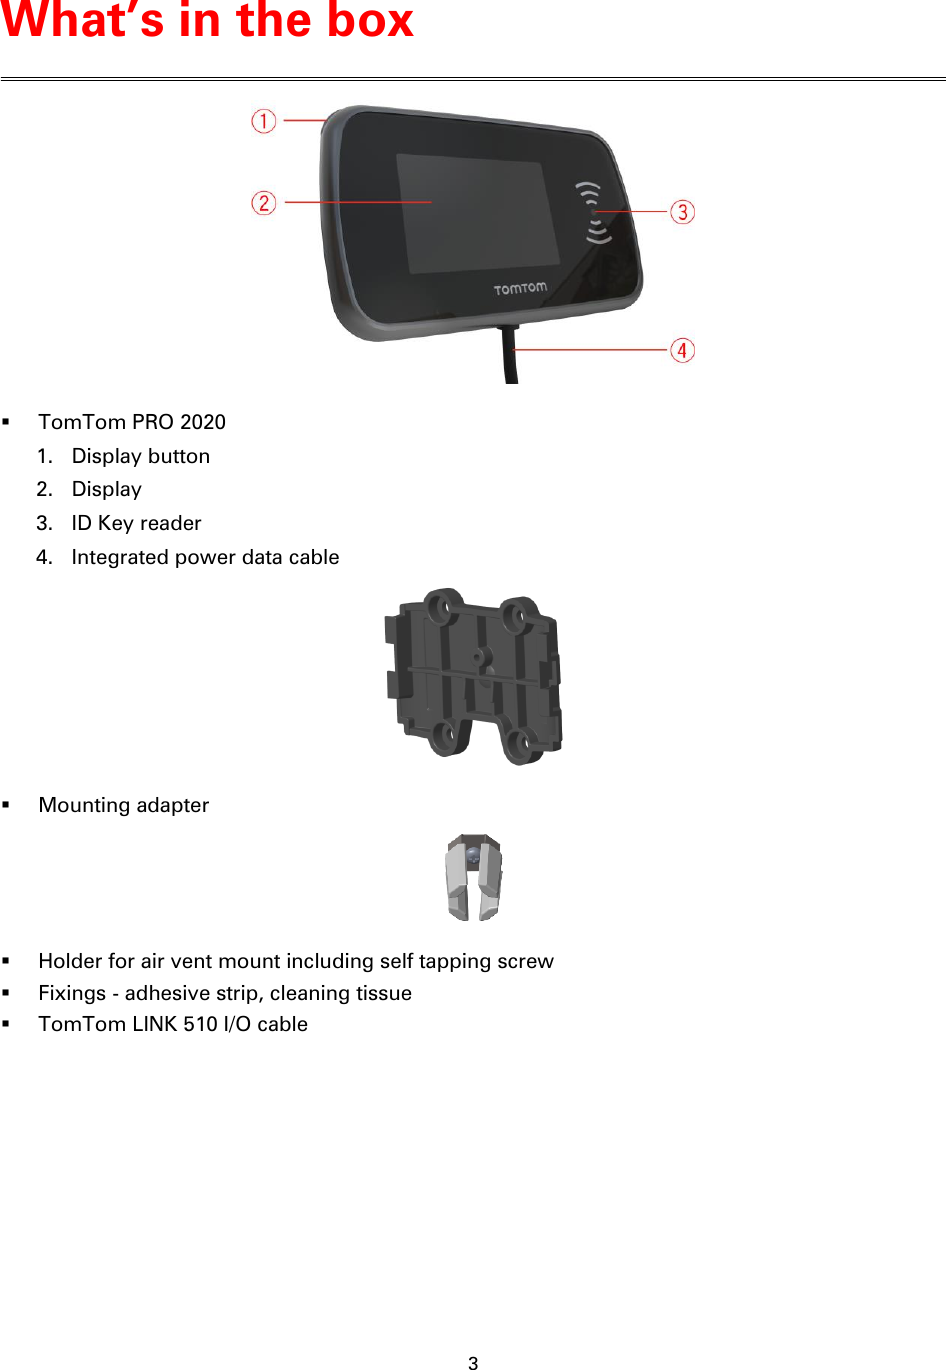 3      TomTom PRO 2020 1. Display button 2. Display 3. ID Key reader 4. Integrated power data cable   Mounting adapter   Holder for air vent mount including self tapping screw  Fixings - adhesive strip, cleaning tissue  TomTom LINK 510 I/O cable What’s in the box 